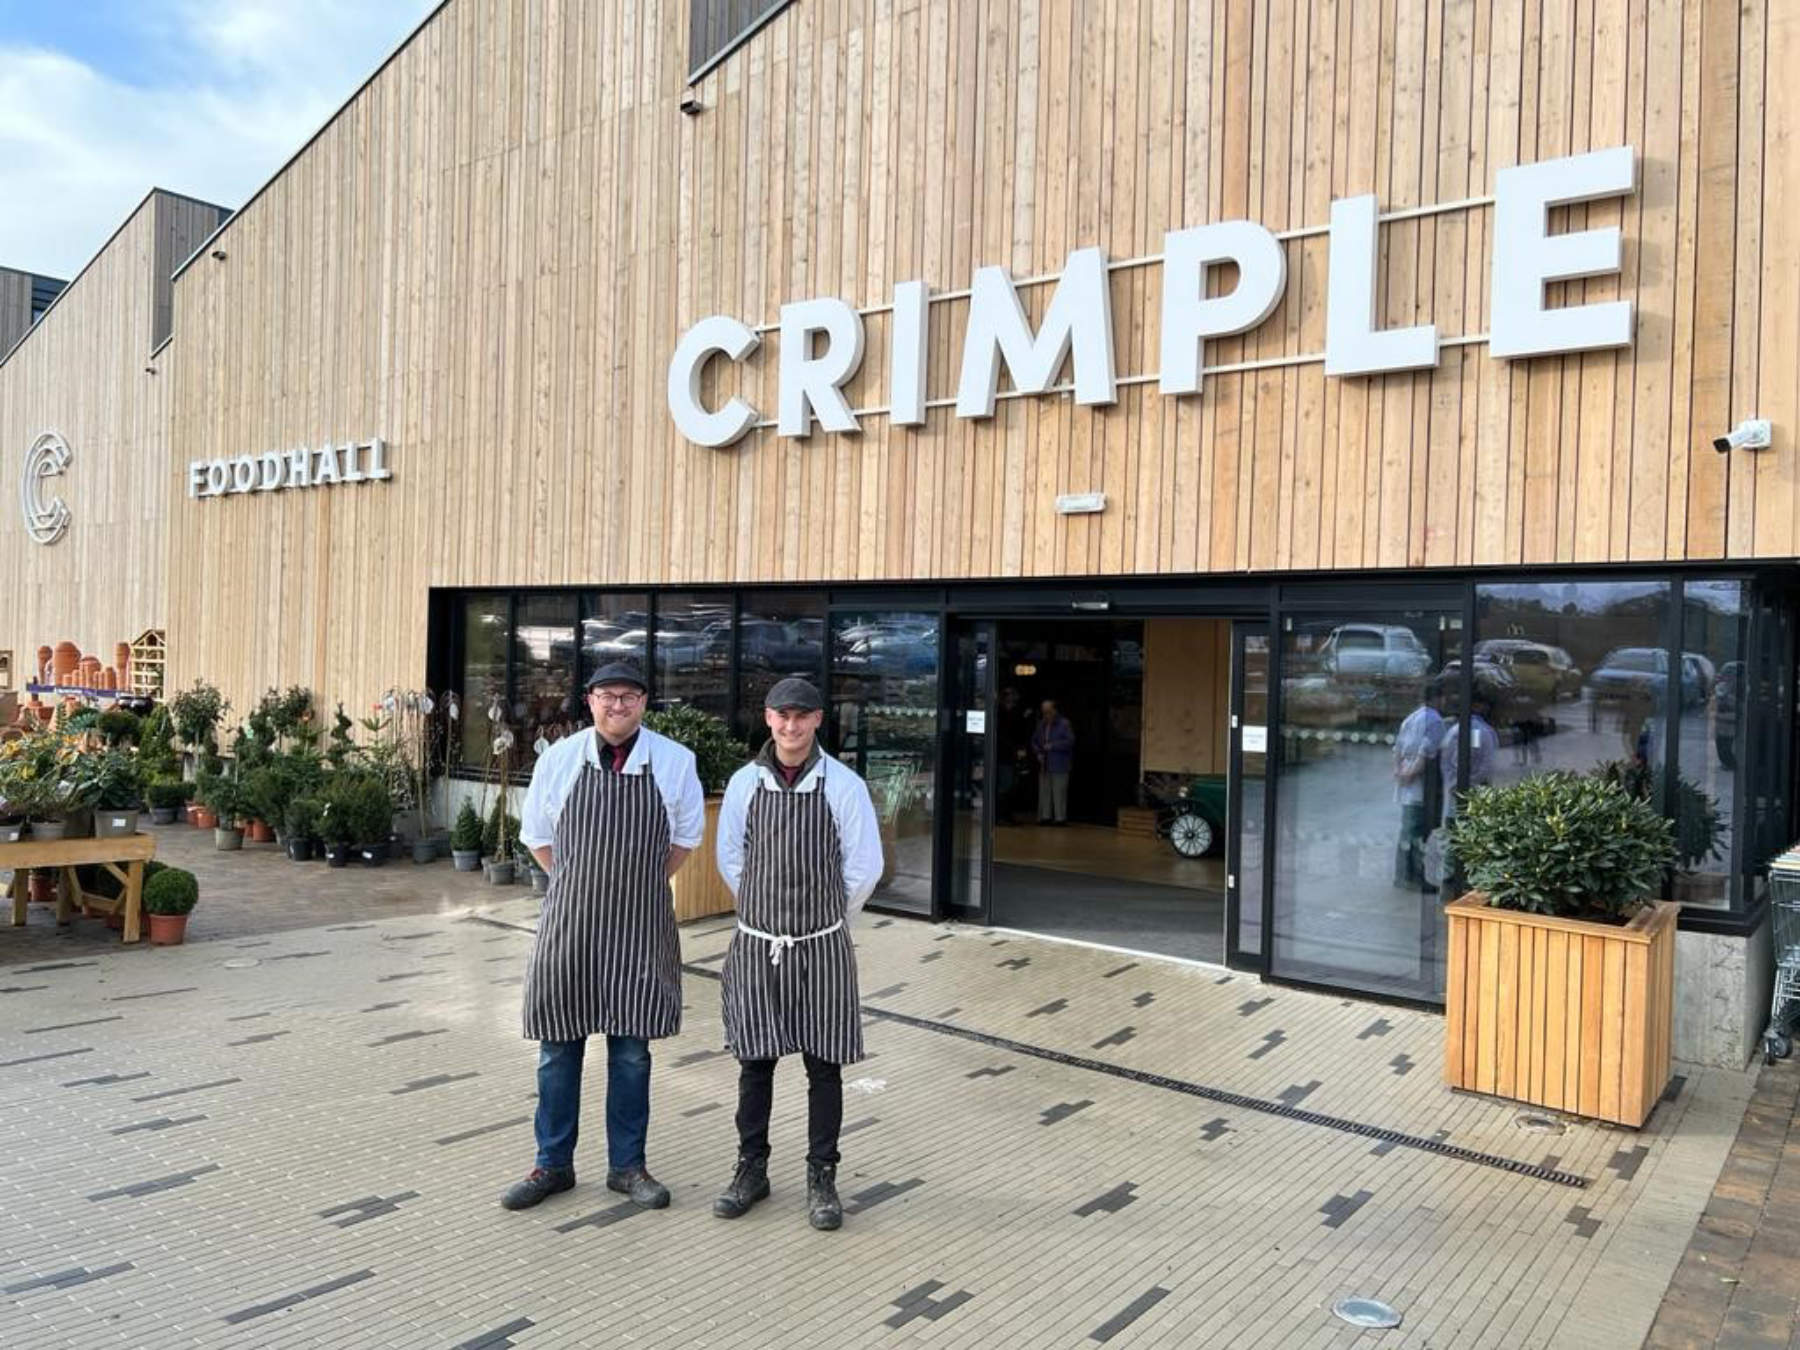 Pictured outside Crimple Food Hall are butchery manager Jack Holden, left, and assistant manager Harley Robertshaw